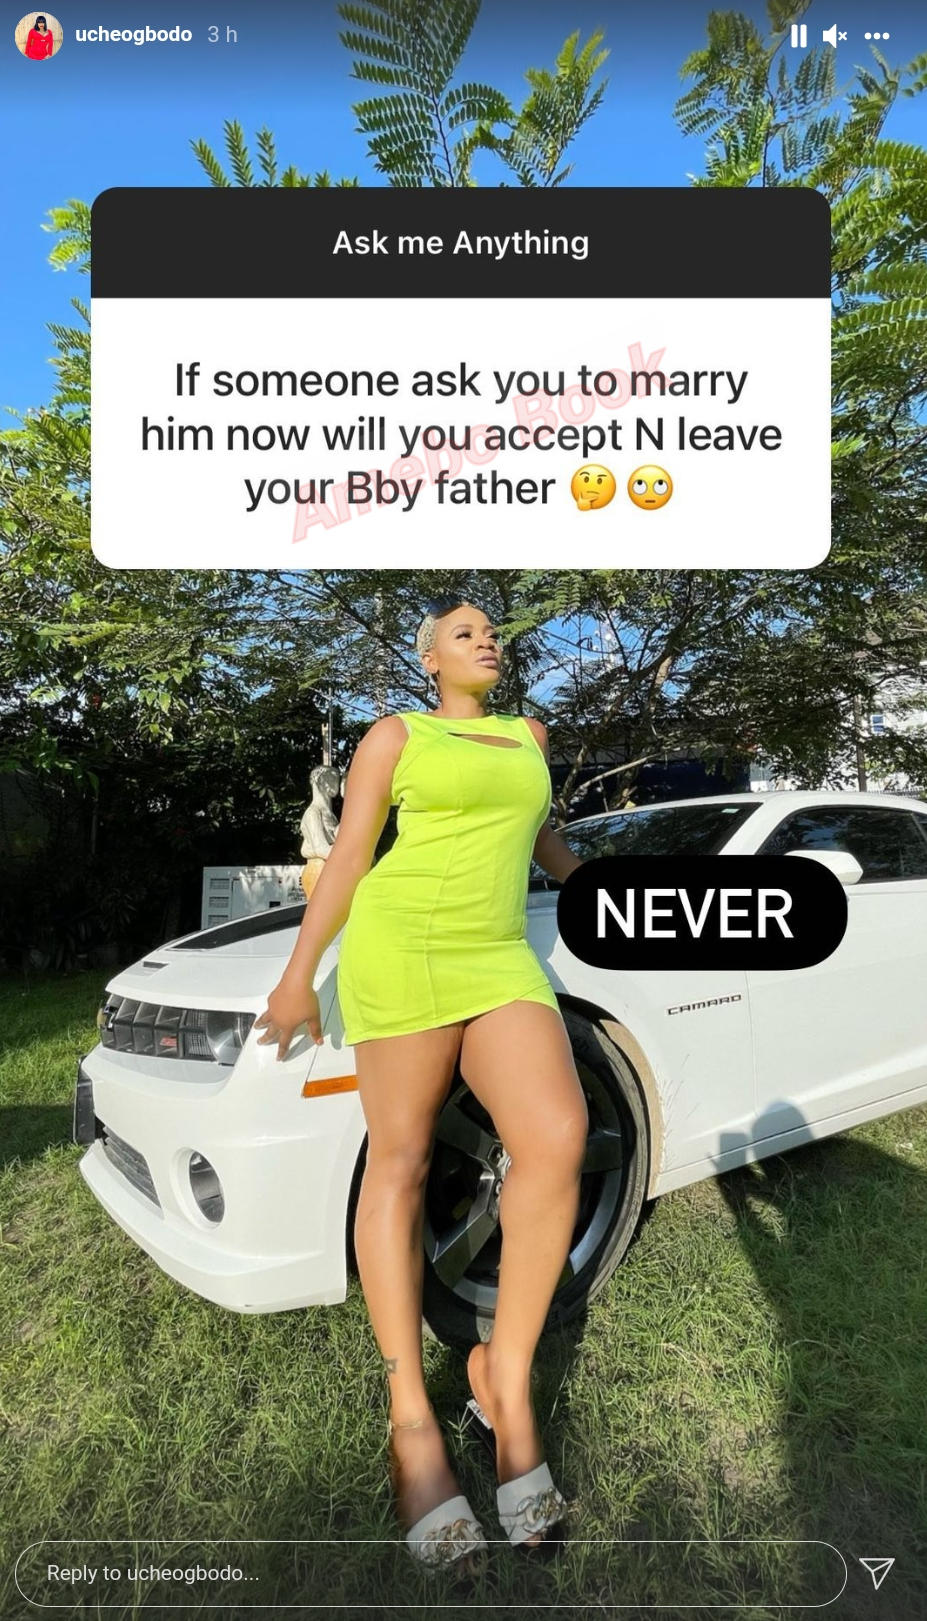 Never Leave Babyfather To Marry Another Man Uche Ogbodo (2)